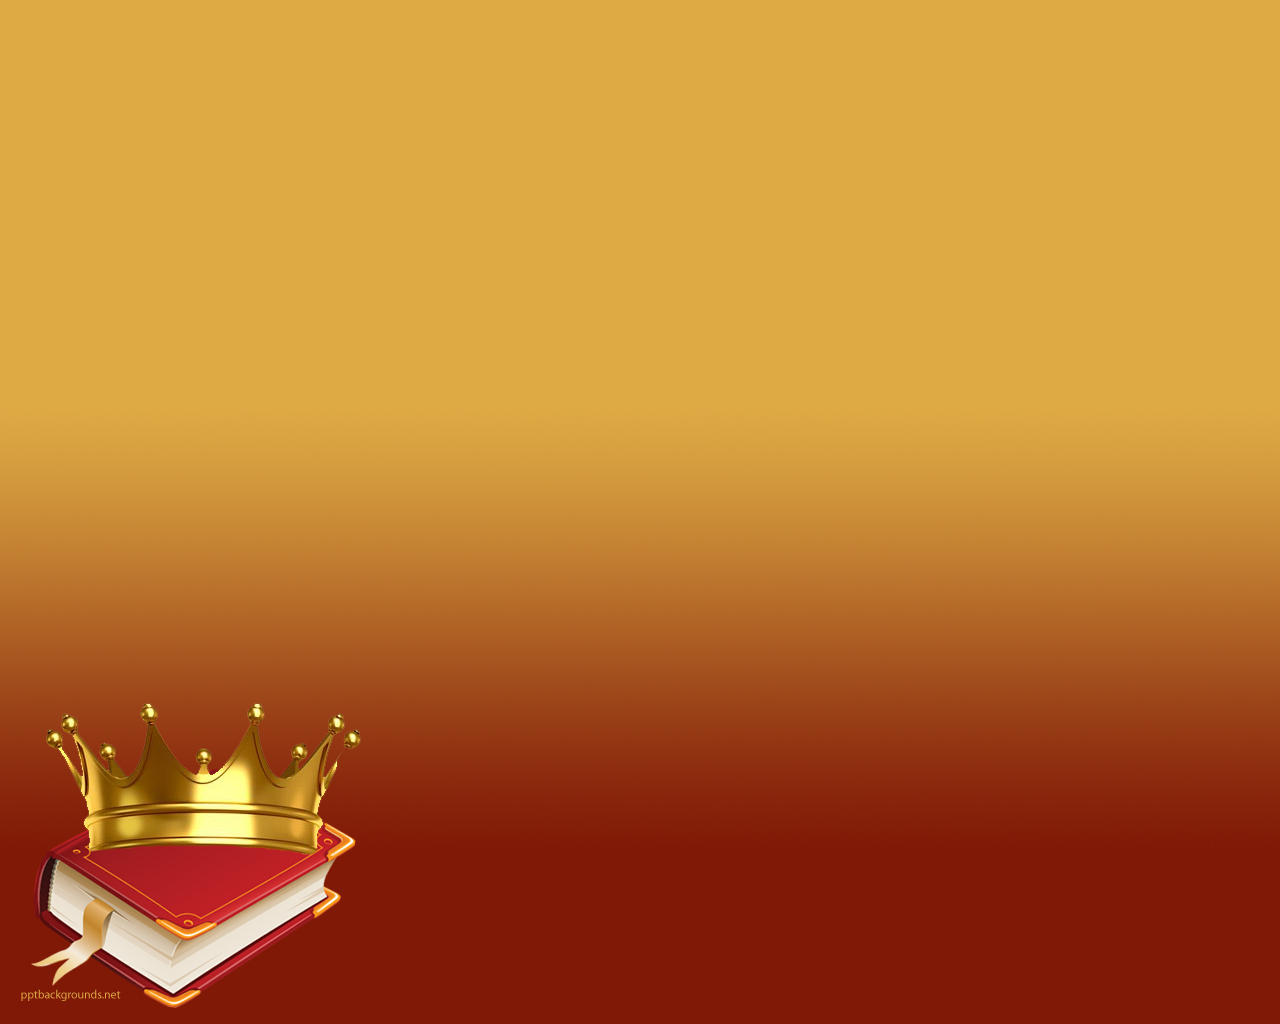 Study King powerpoint background